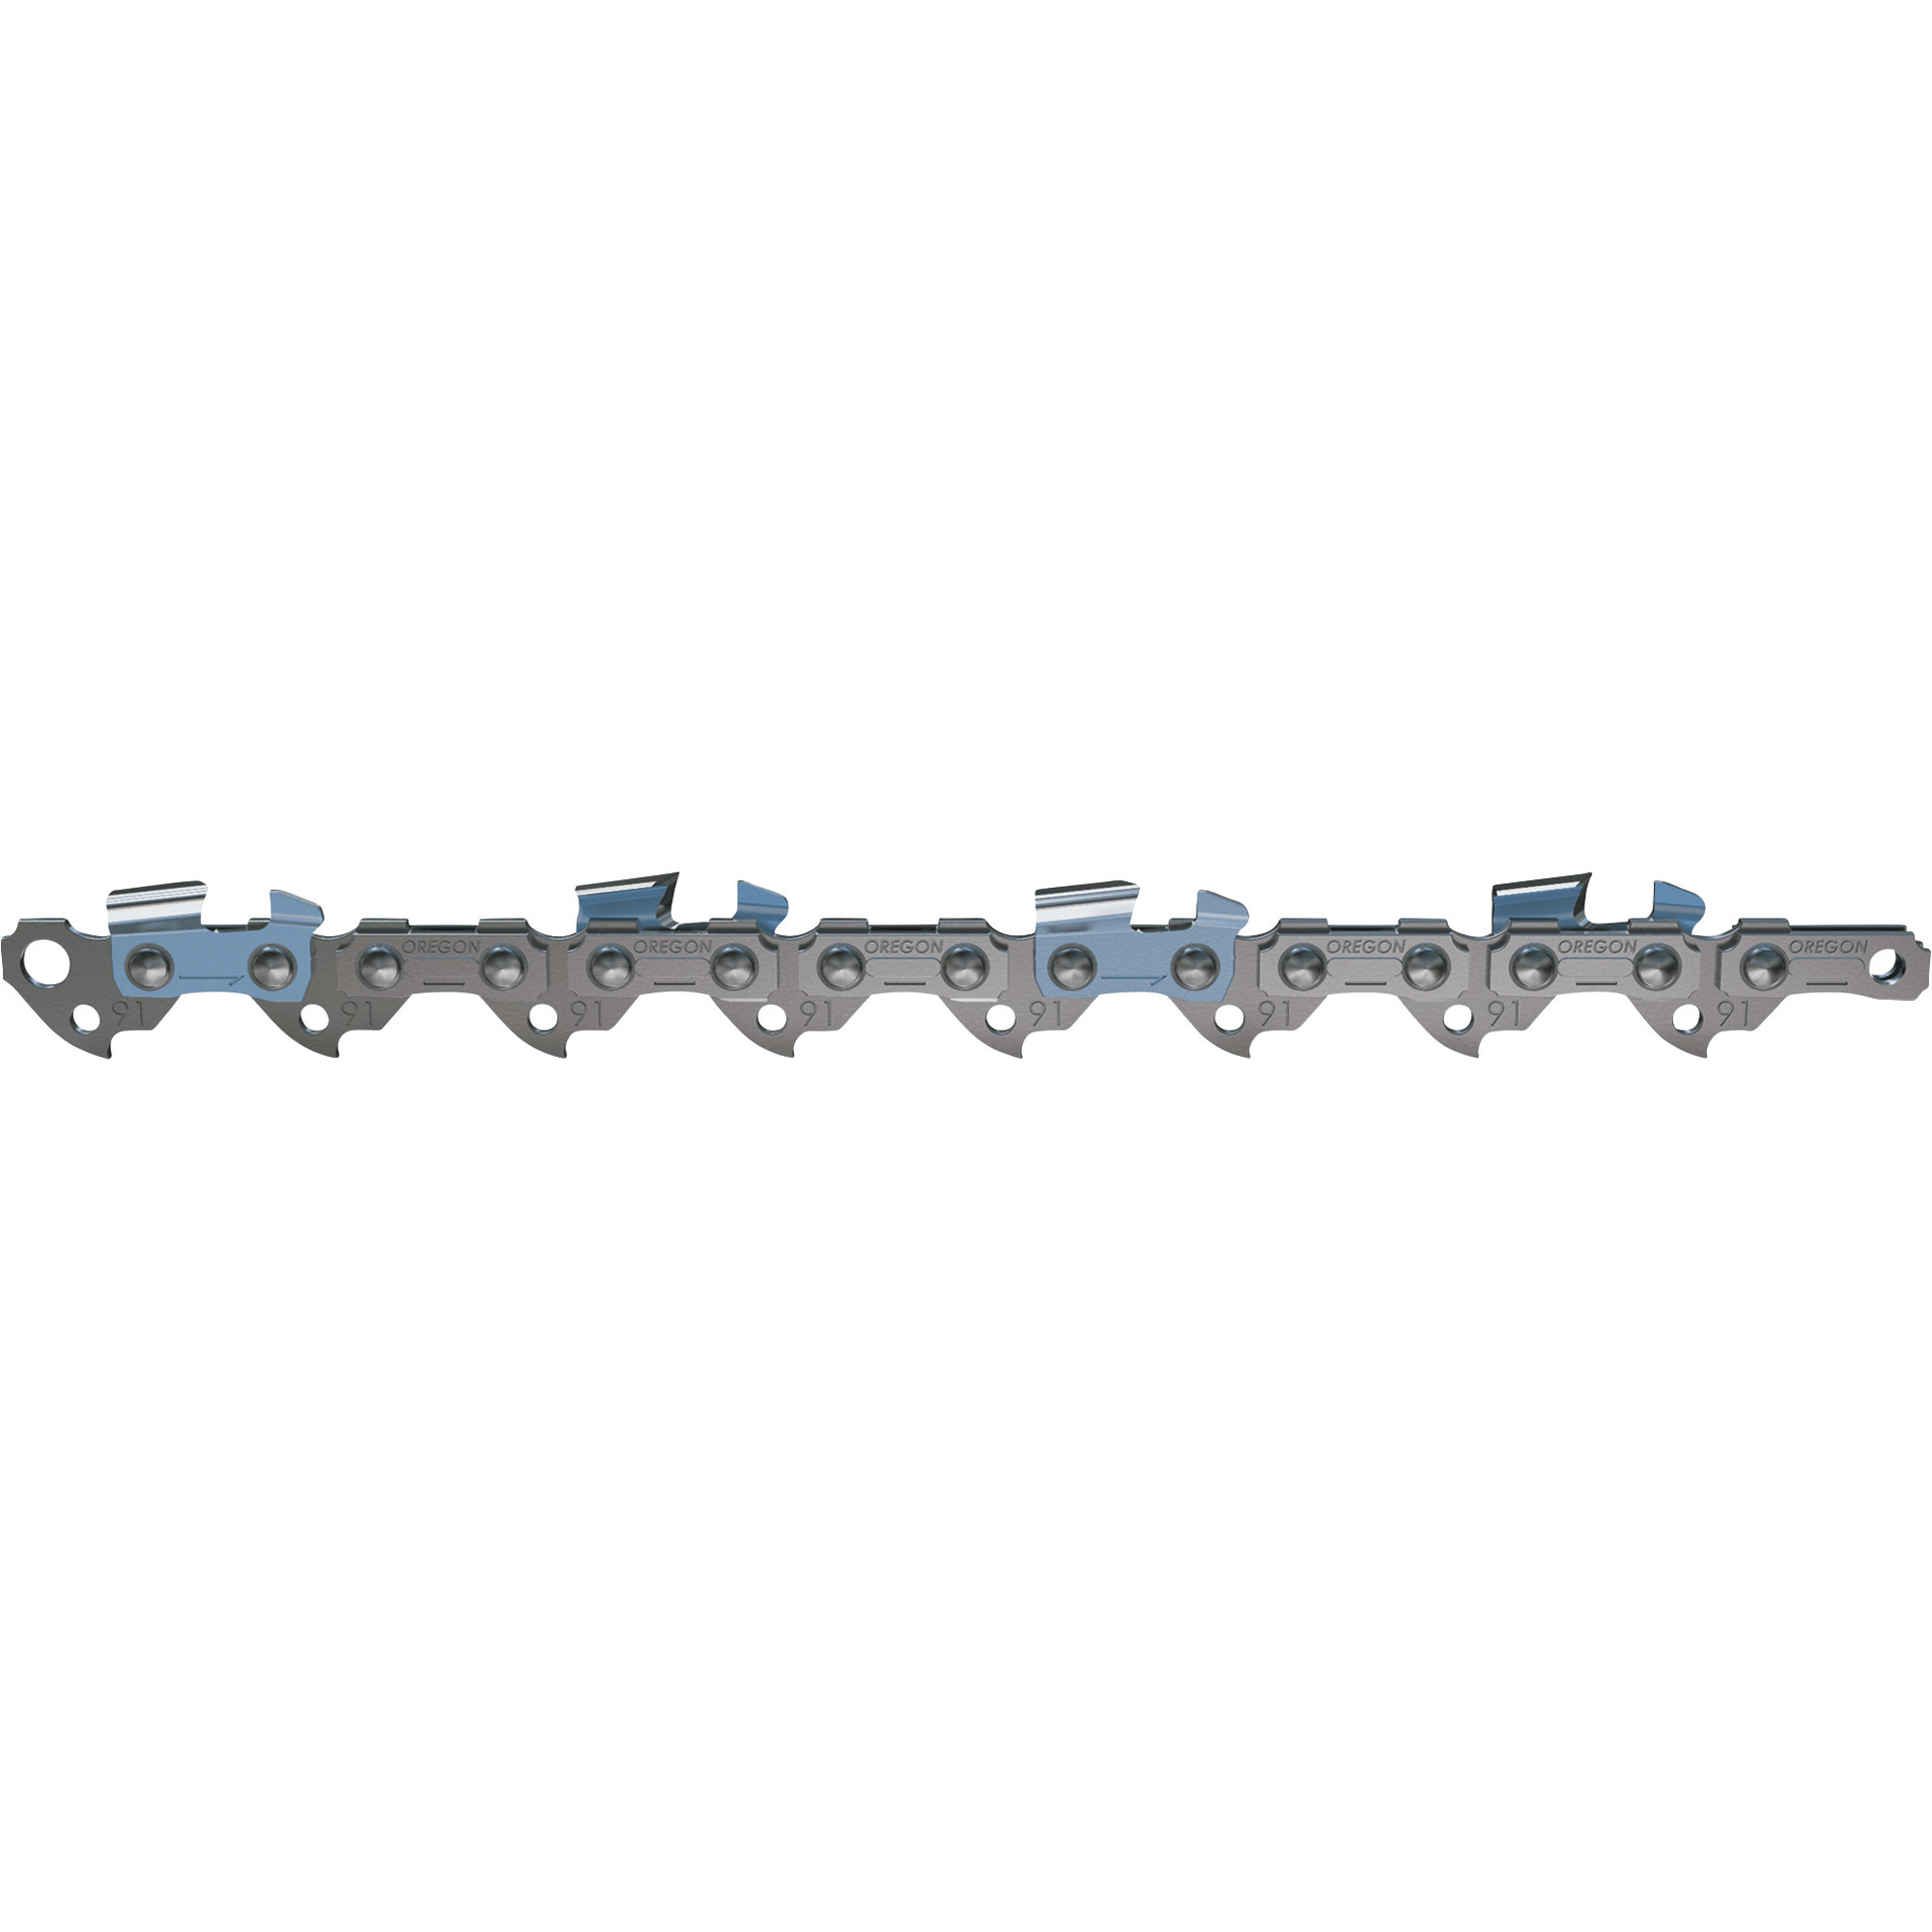 Oregon X-Grind Chainsaw Chain, Long Top Plate, 3/8Inch Low Profile x 0.050Inch, Fits 16Inch Bar, Model T55/91VXL055G